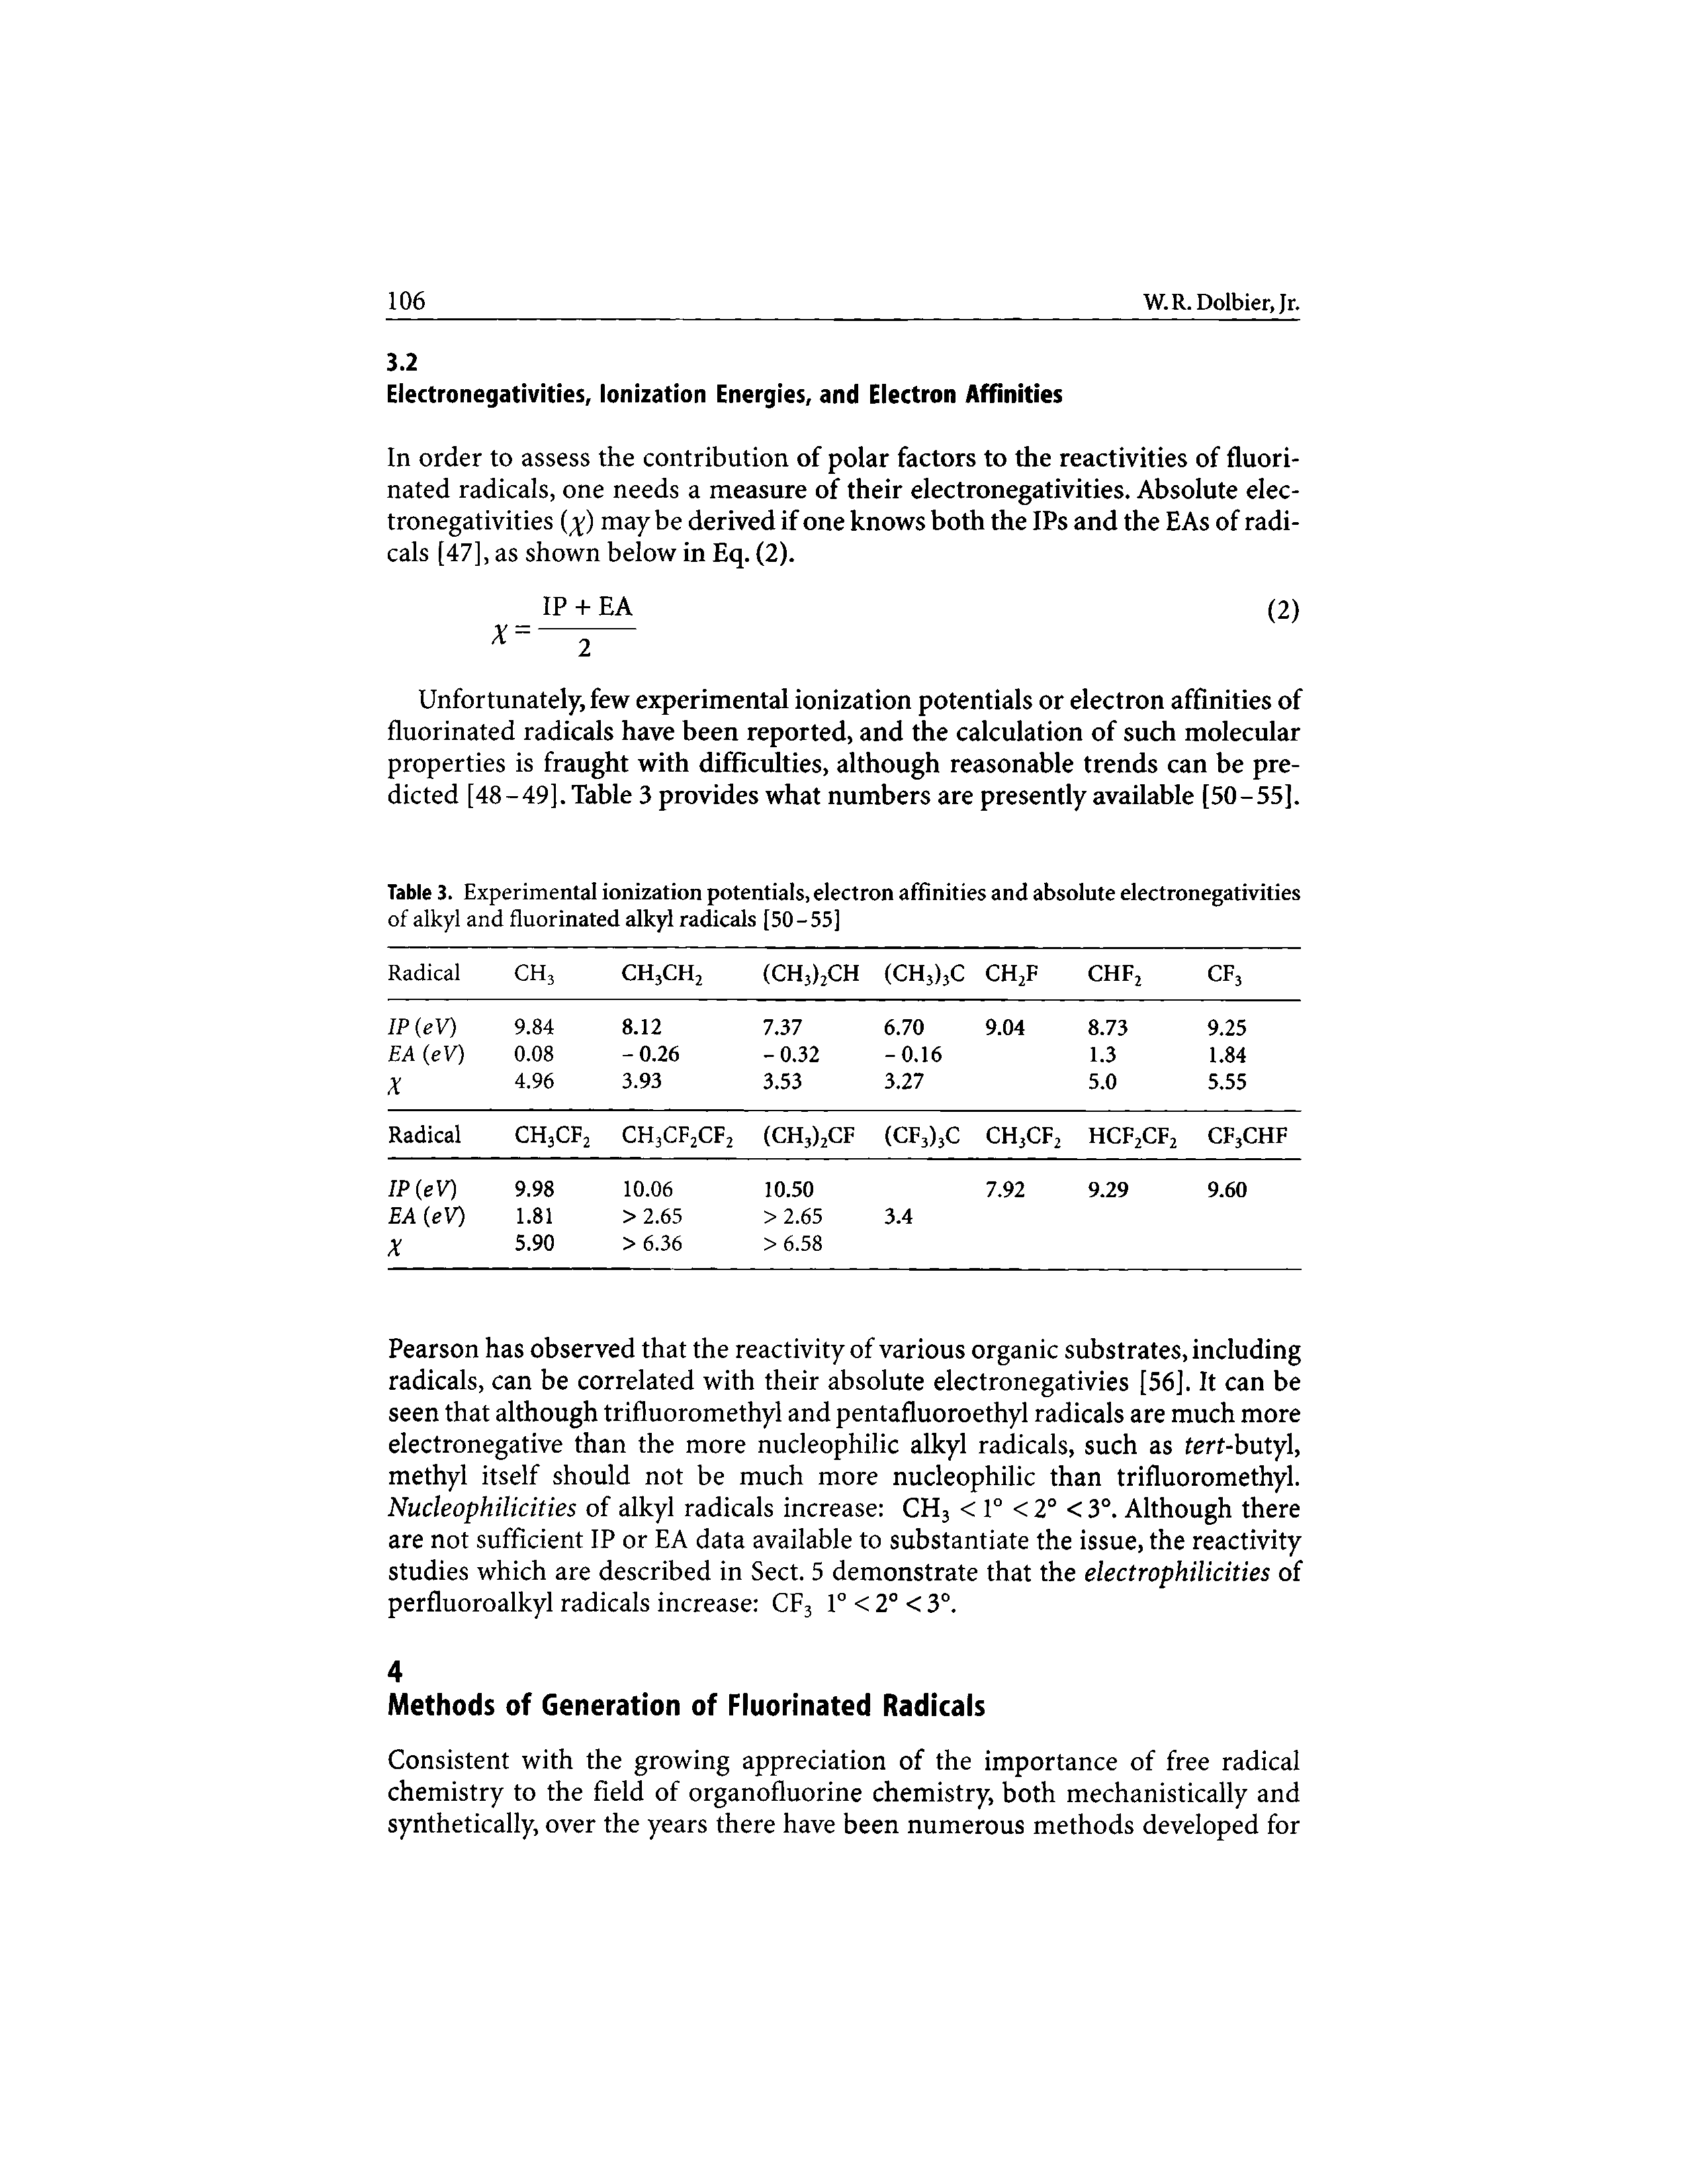 Table 3. Experimental ionization potentials, electron affinities and absolute electronegativities of alkyl and fluorinated alkyl radicals [50-55]...